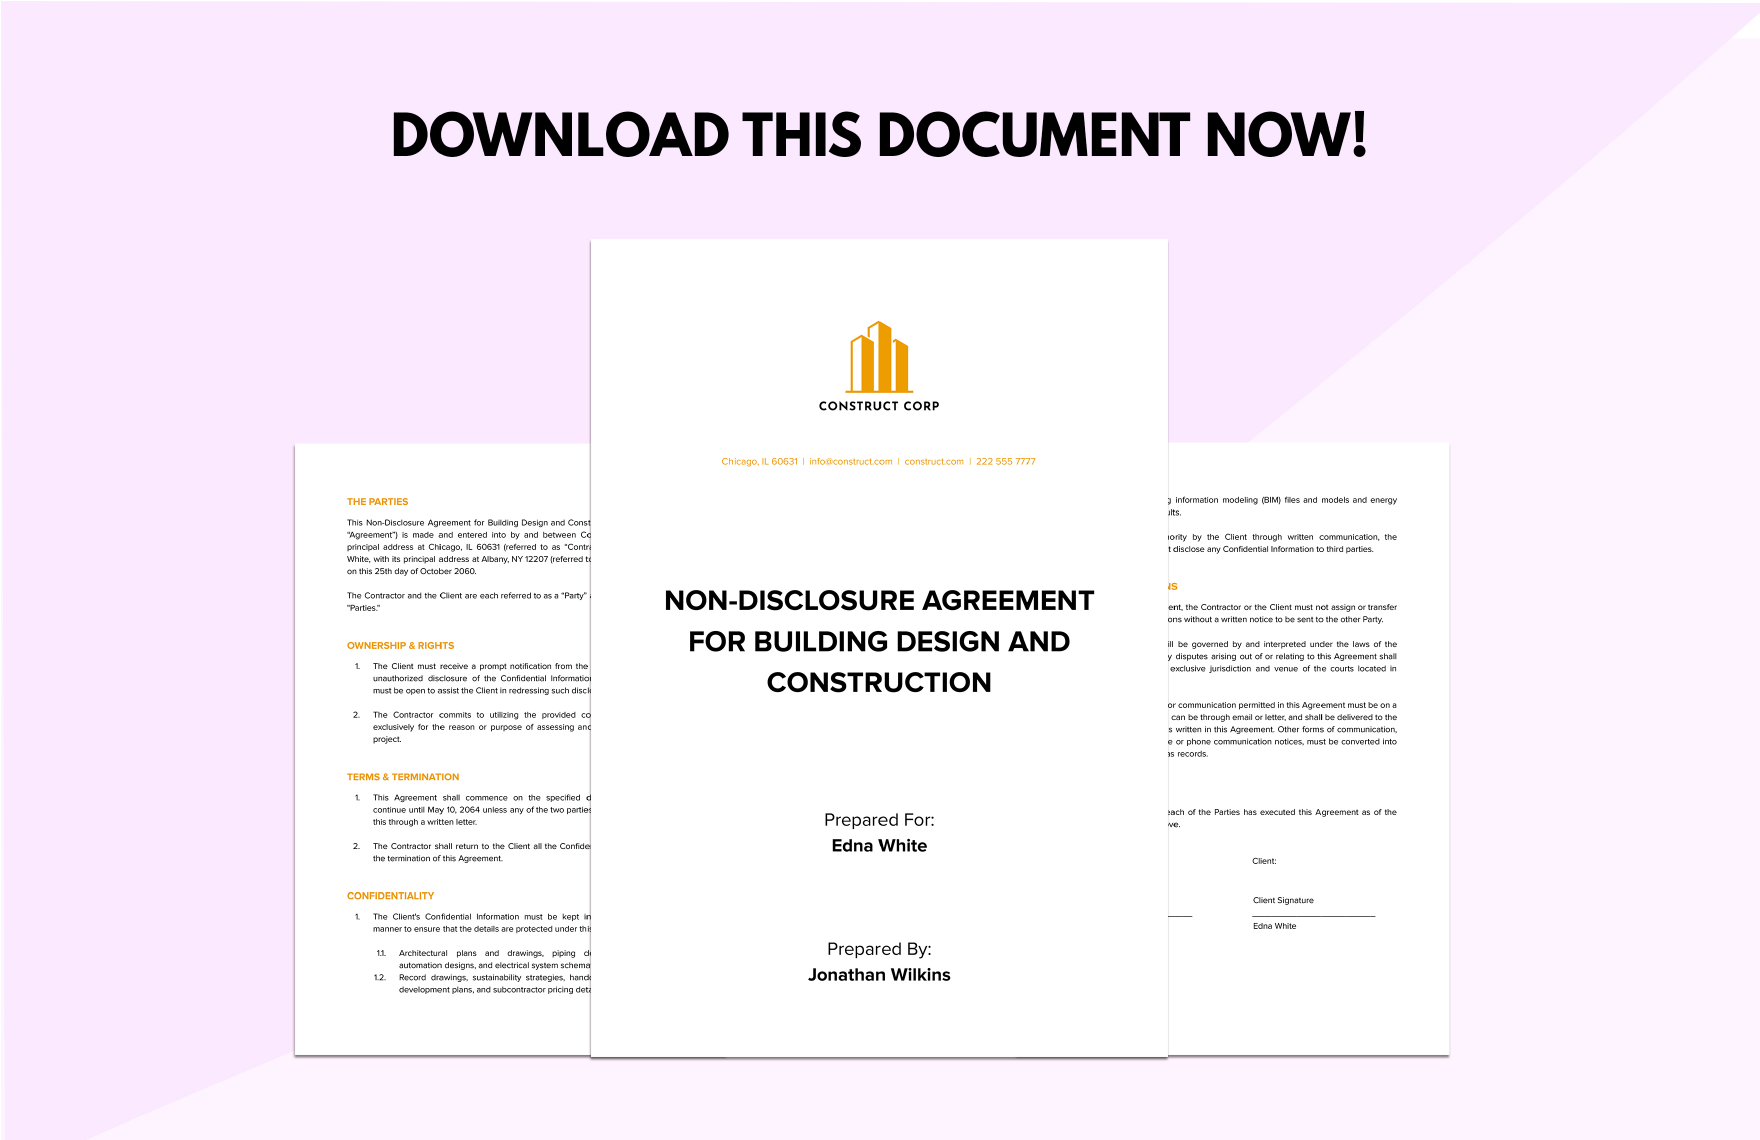 Non-Disclosure Agreement for Building Design and Construction